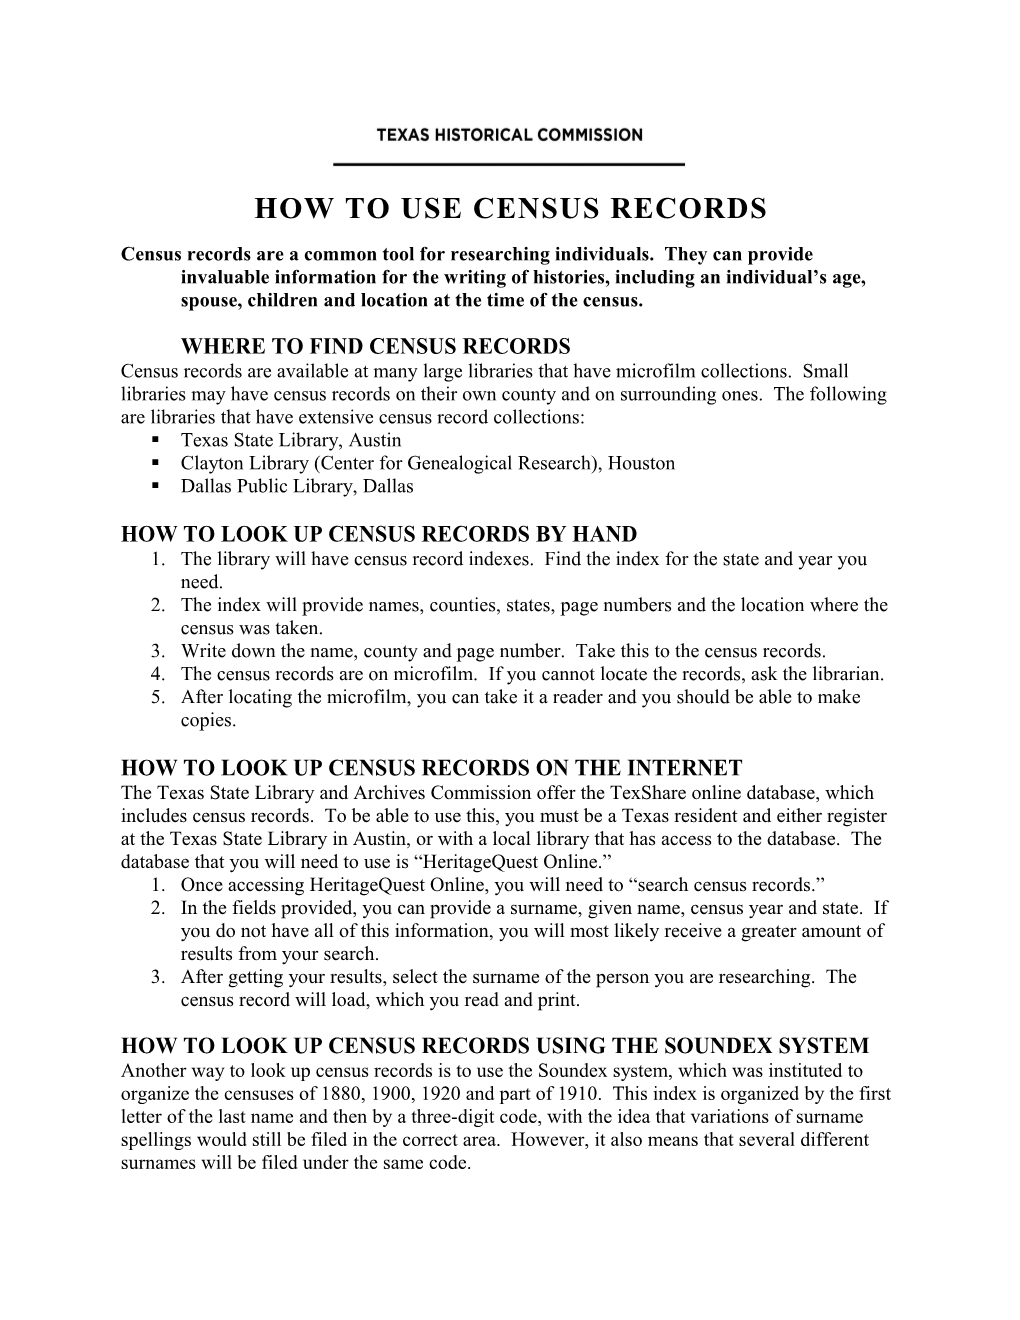 How to Use Census Records